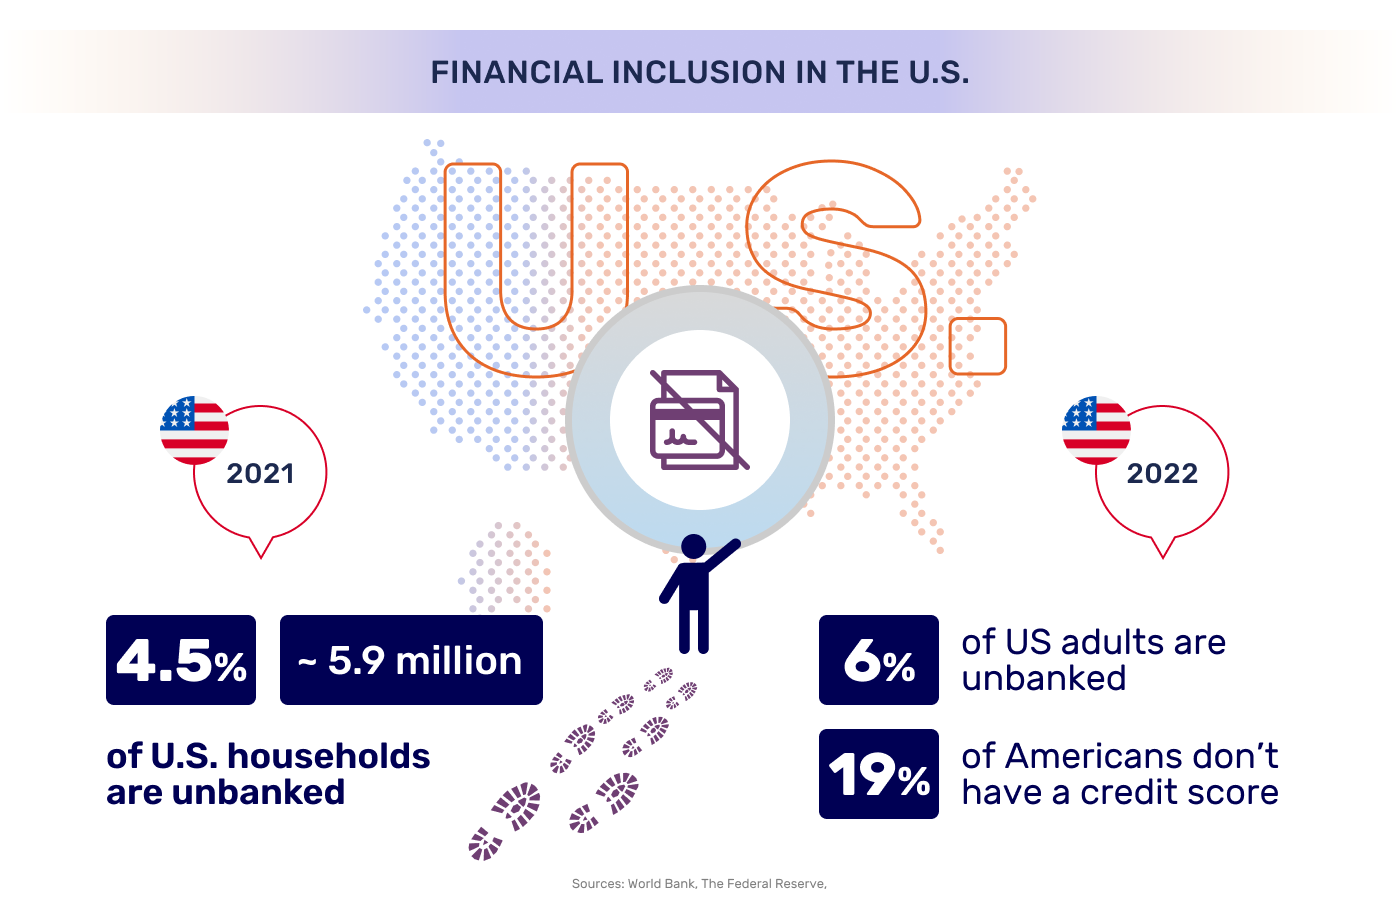 underbanked households and individuals in the US 2022